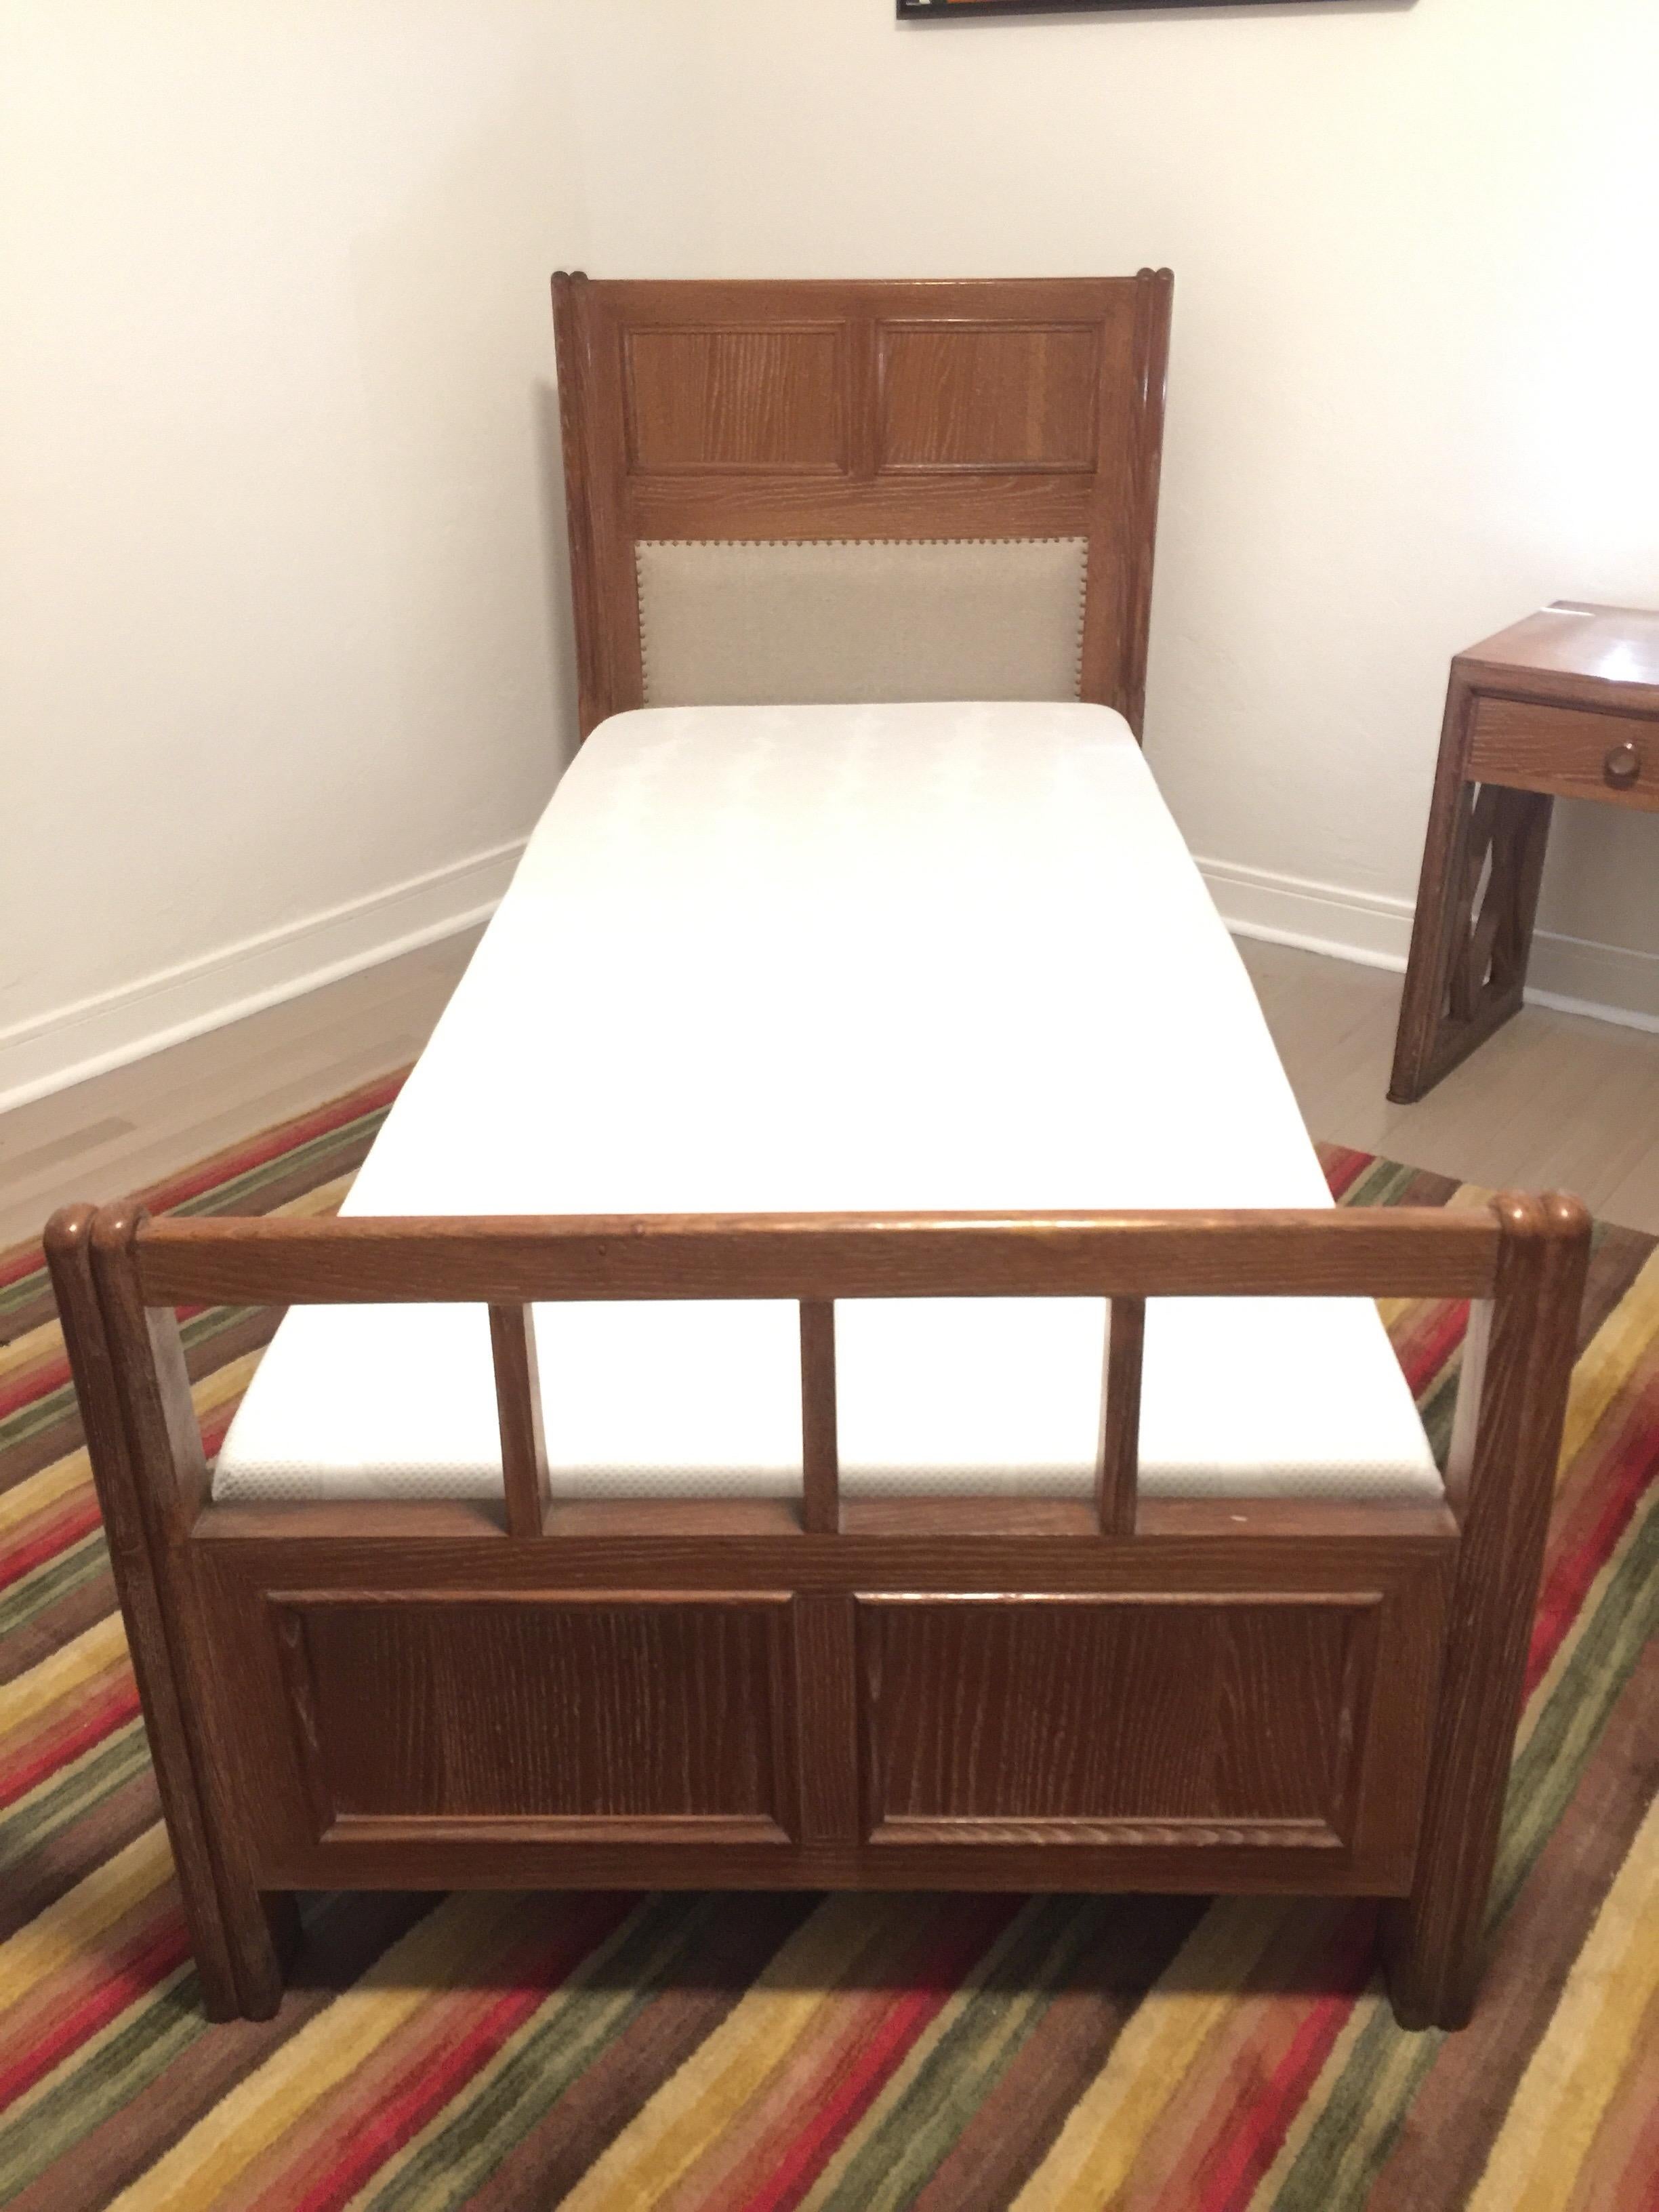 This is a set of Twin beds, frame, base and mattress (included if requested) in a cerused oak. Excellent stability and details throughout. Nail head trim on linen head boards. Perfect for a guest room or for that sophisticated children's room.